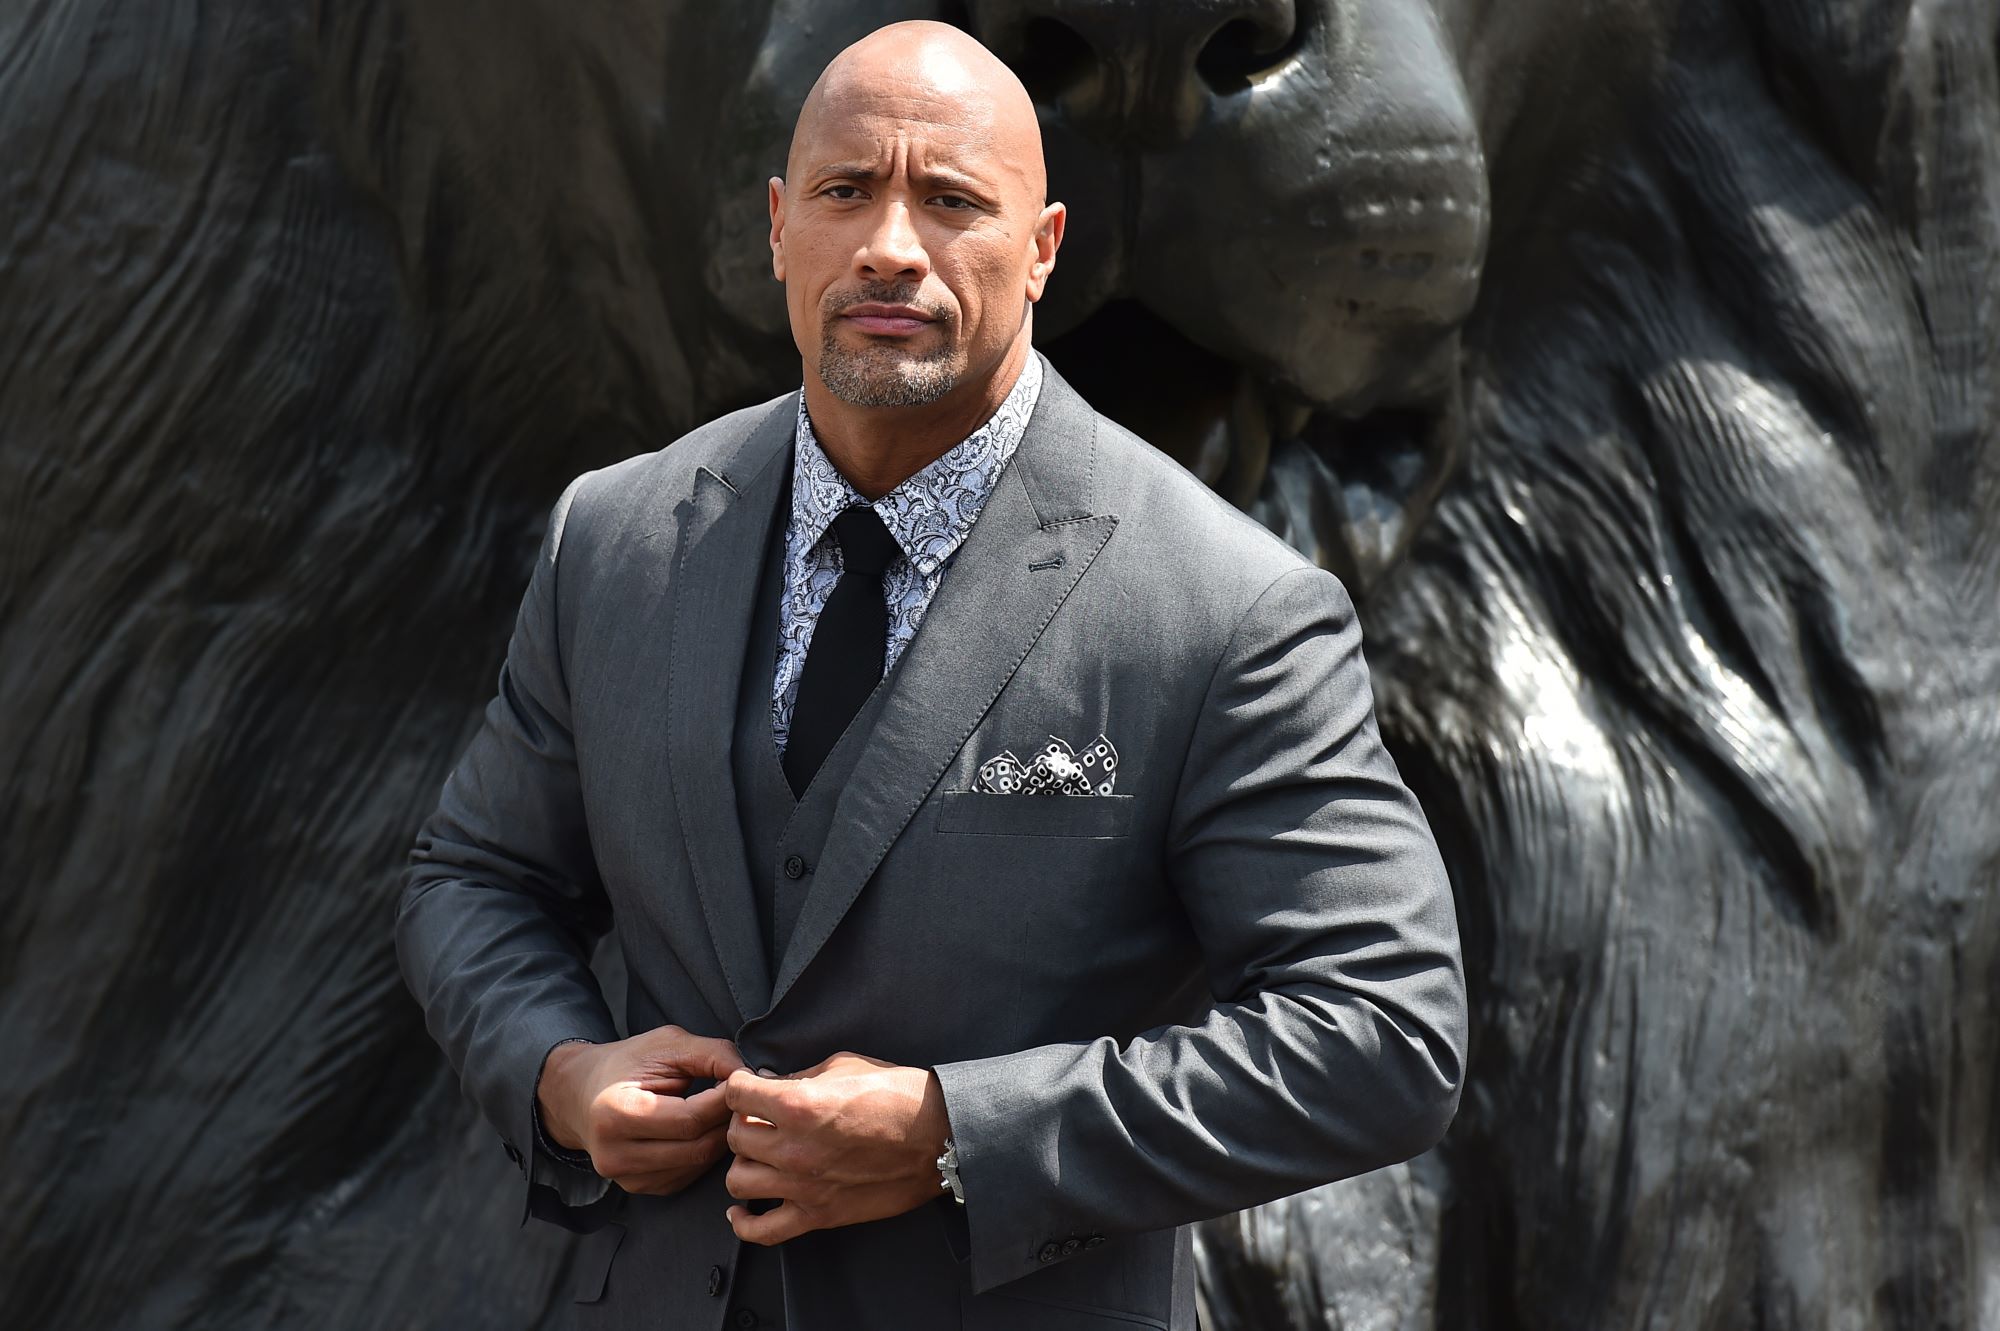 Dwayne Johnson wearing a grey suit with a white shirt and black tie in front of a black background.